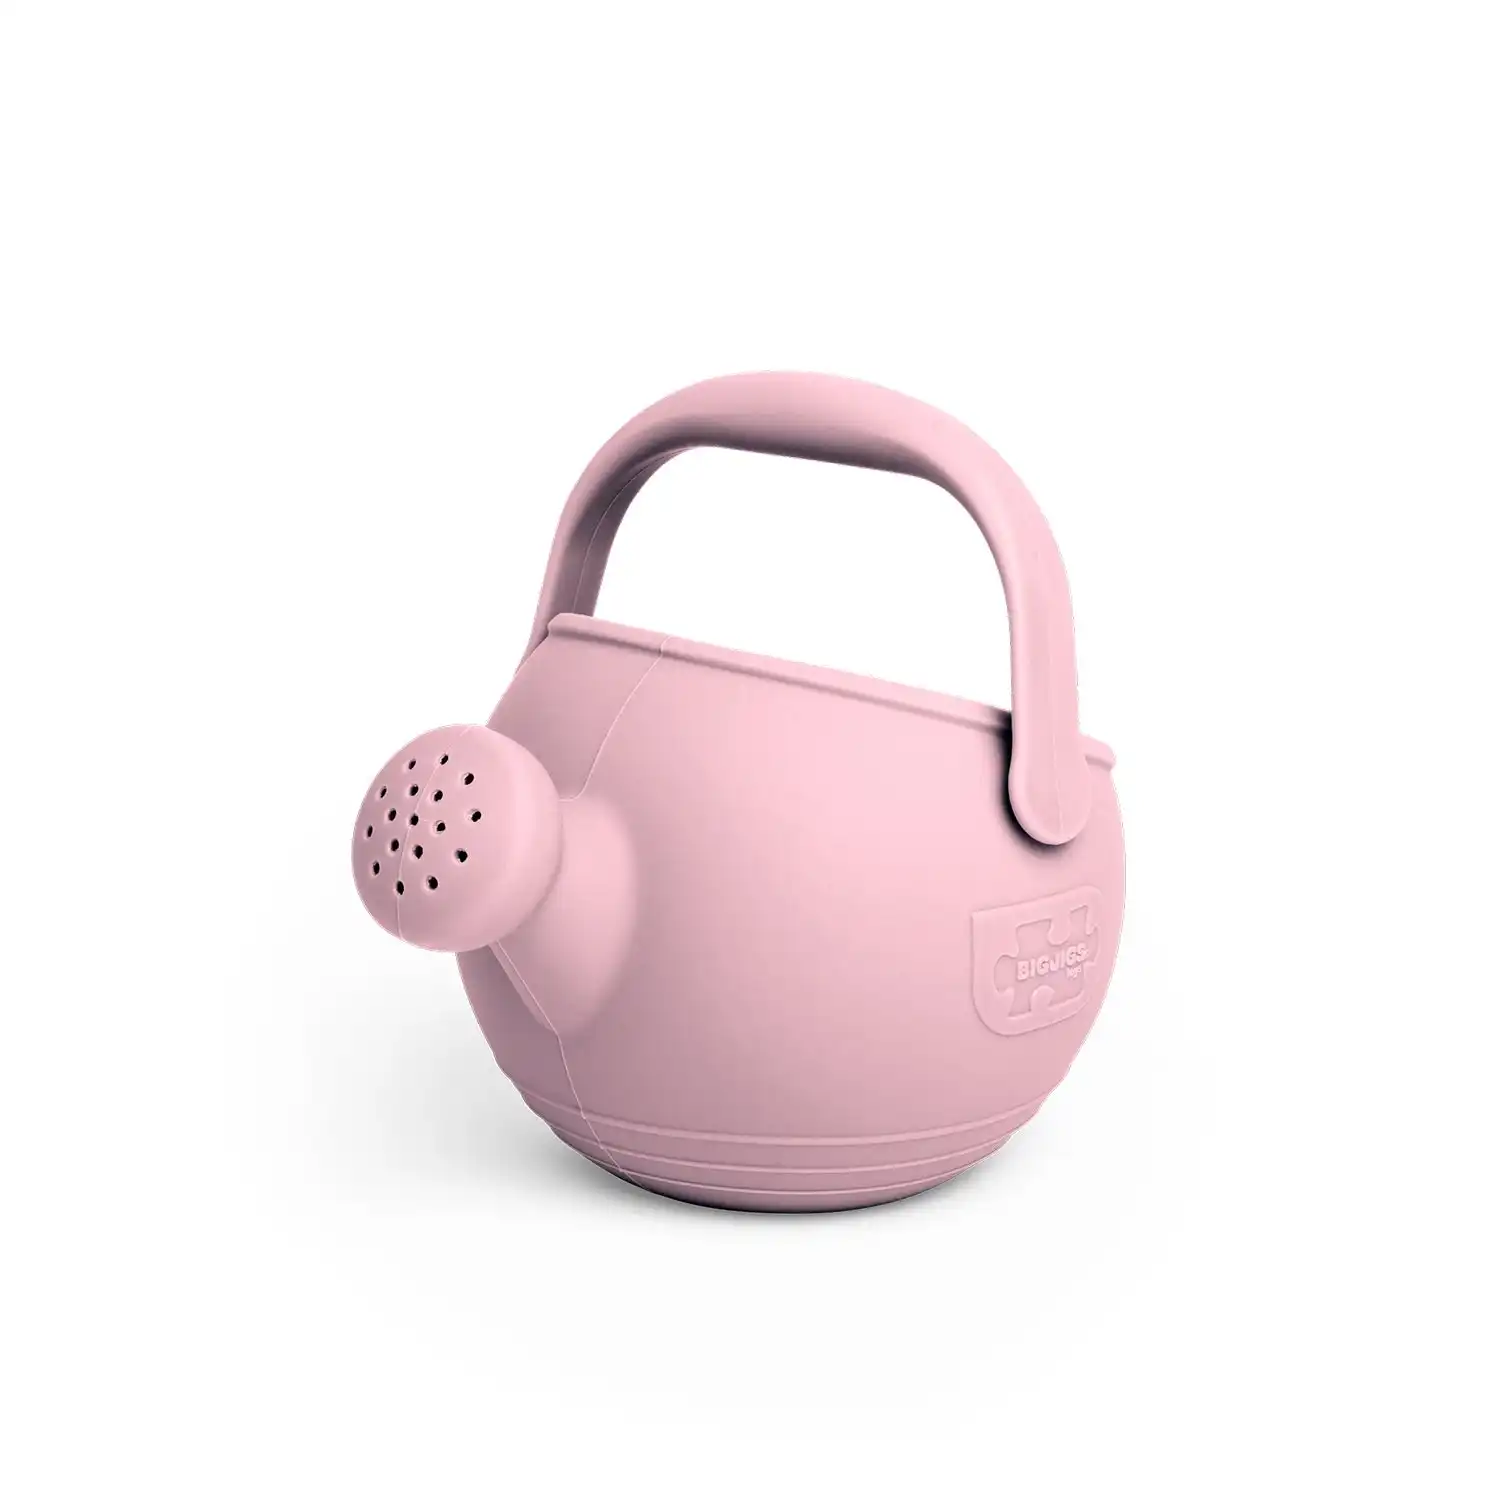 Blush Pink Silicone Watering Can